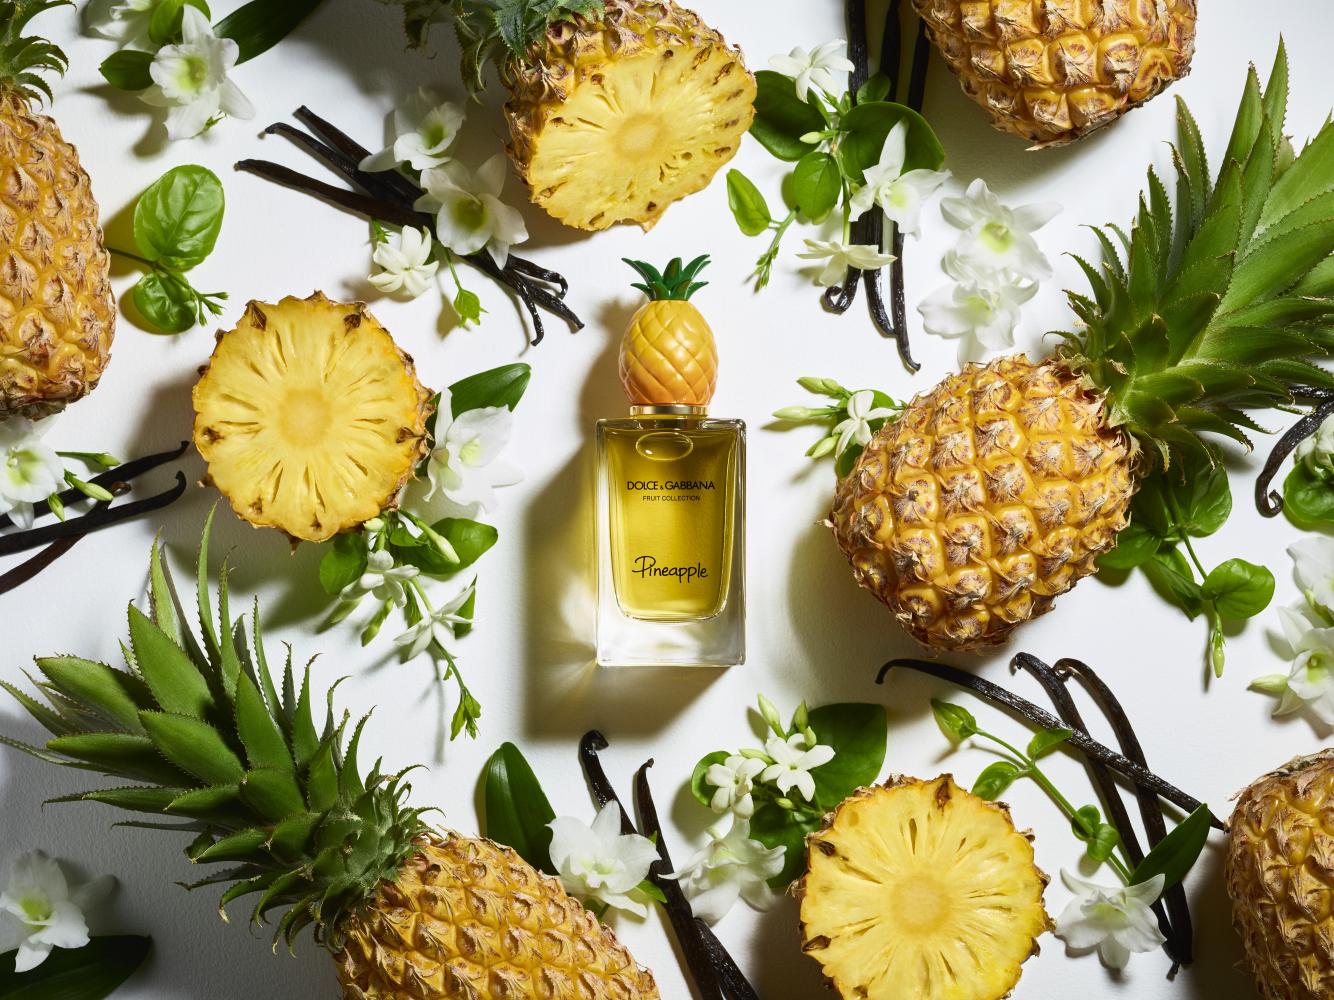 Dolce-Gabbana-Fruit-Collection-Parfume-Review